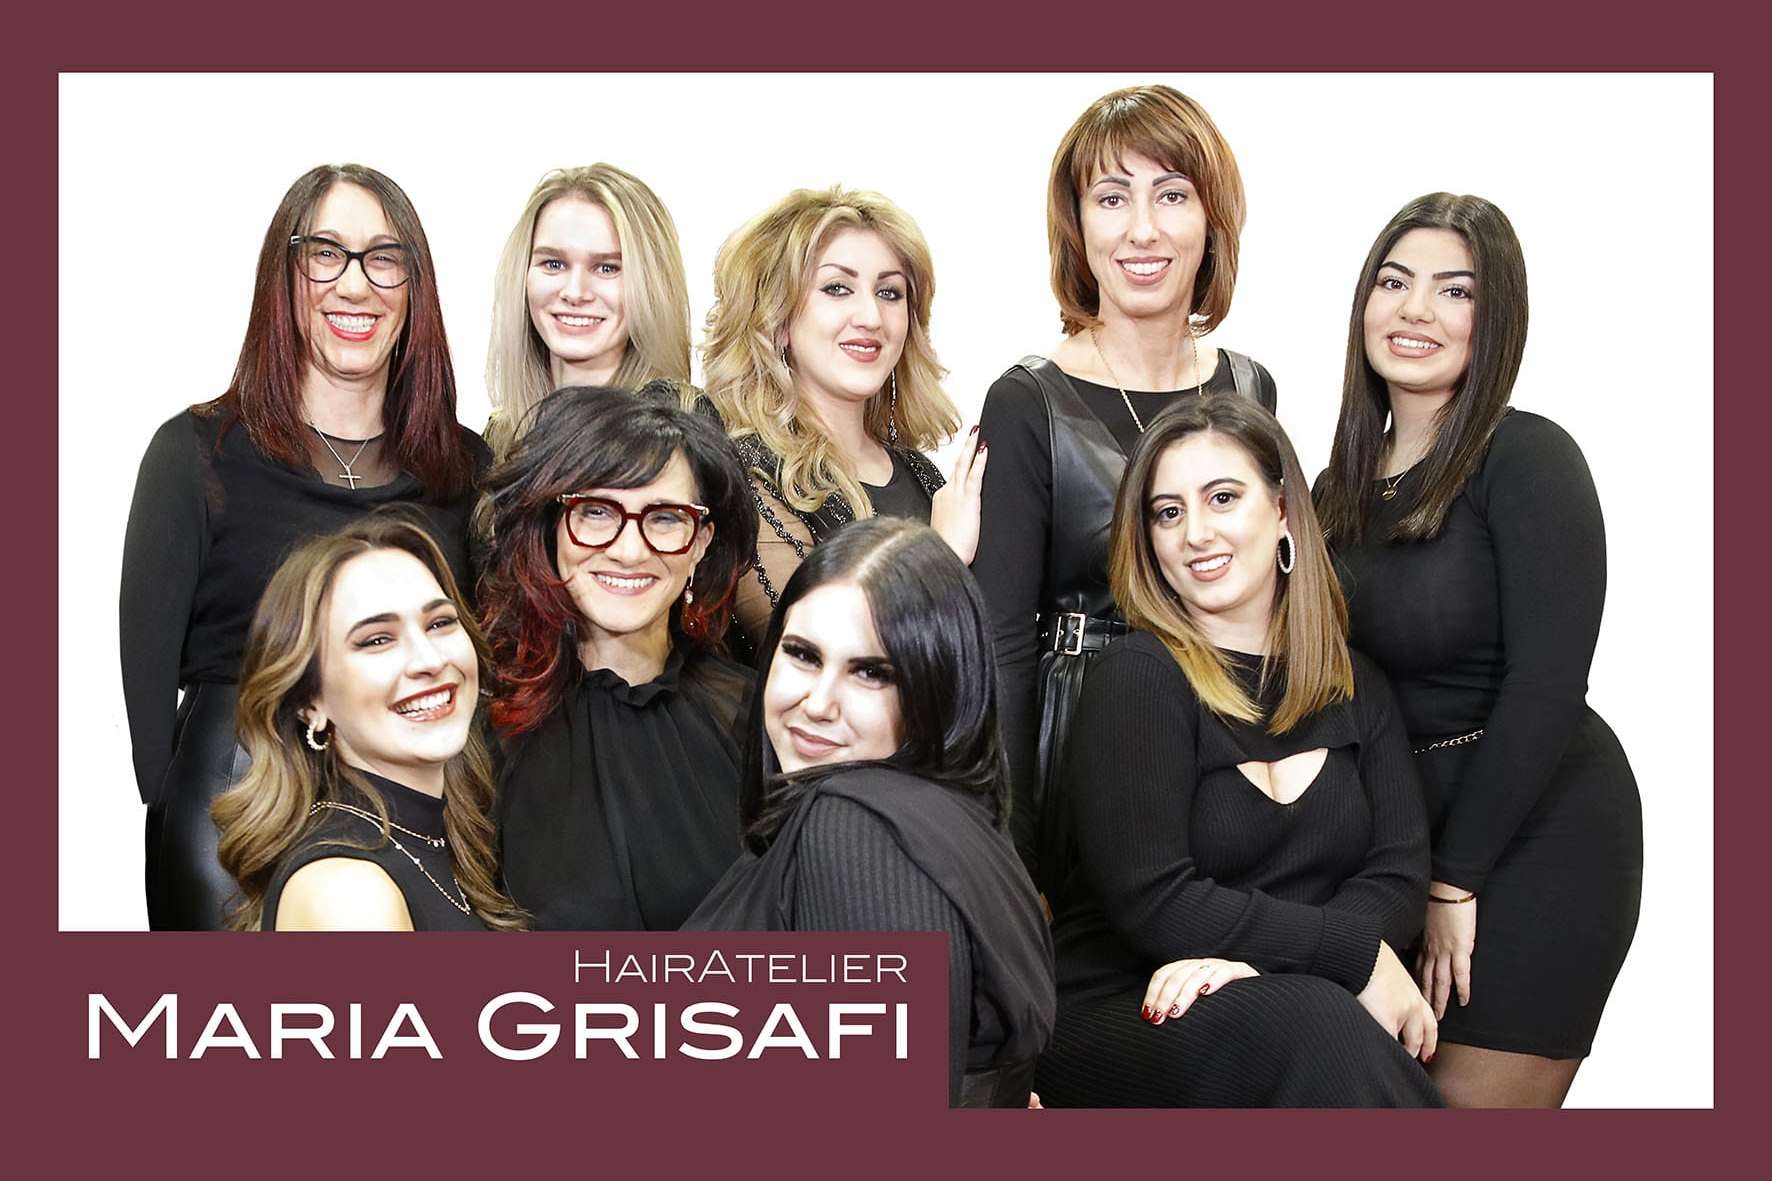 Hair Atelier Maria Grisafi - Frisur & Make Up in Offenbach am Main